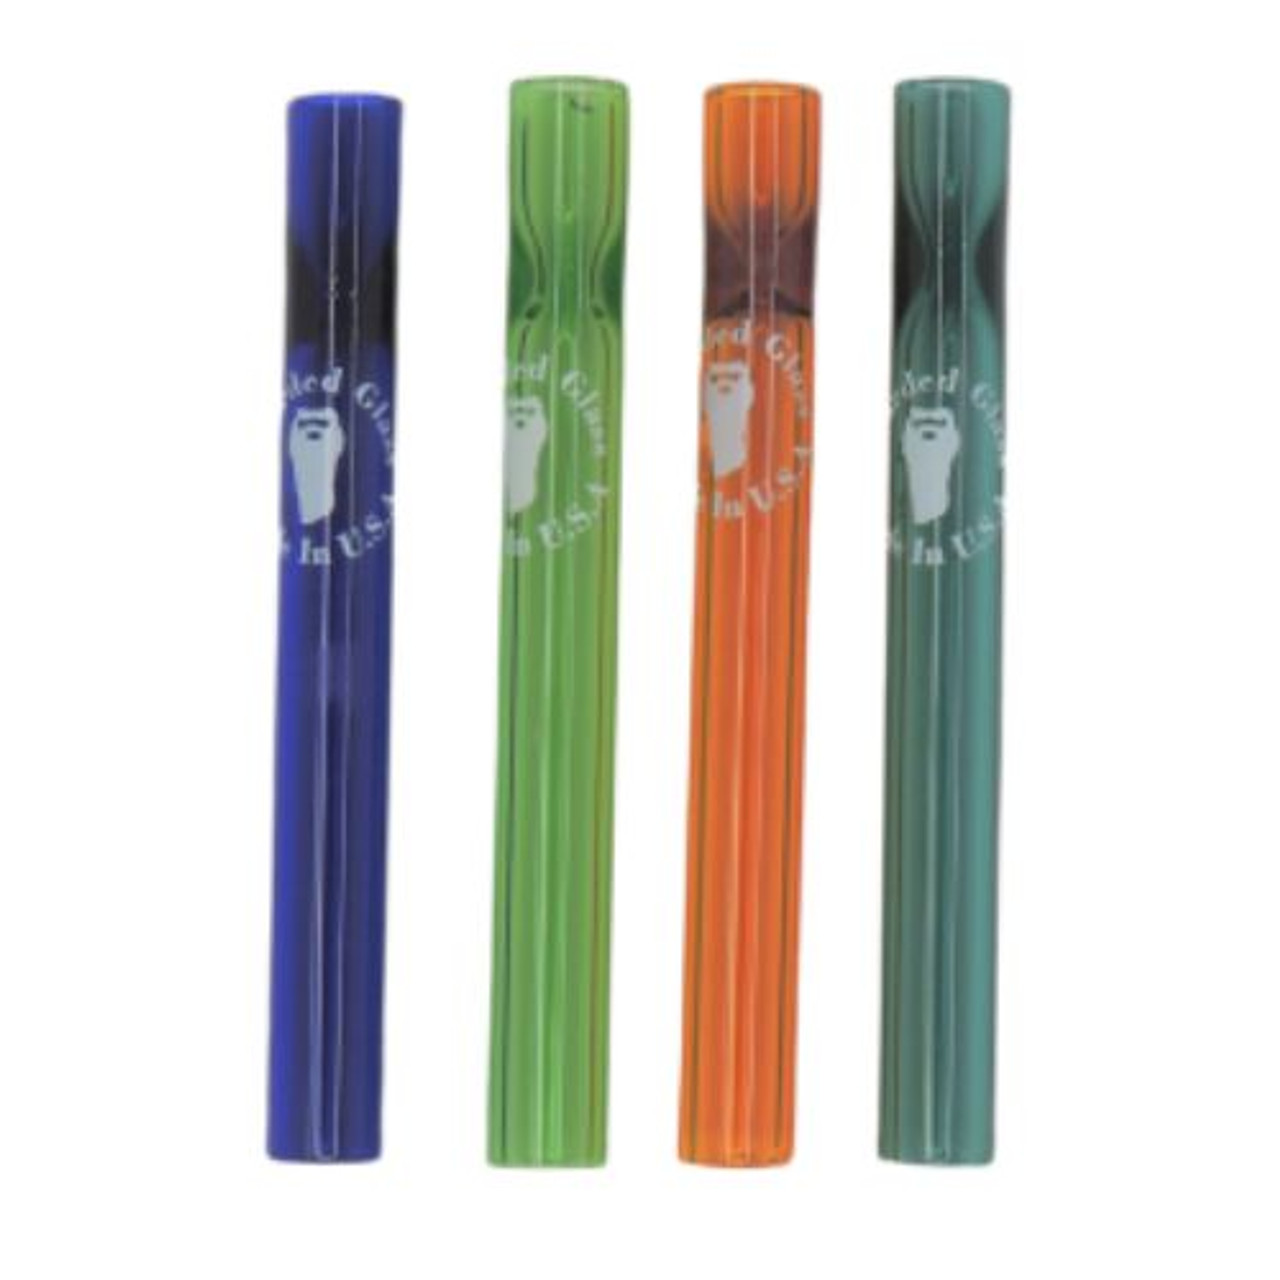 Bearded Long 4" Glass Chillum - Assorted Colors